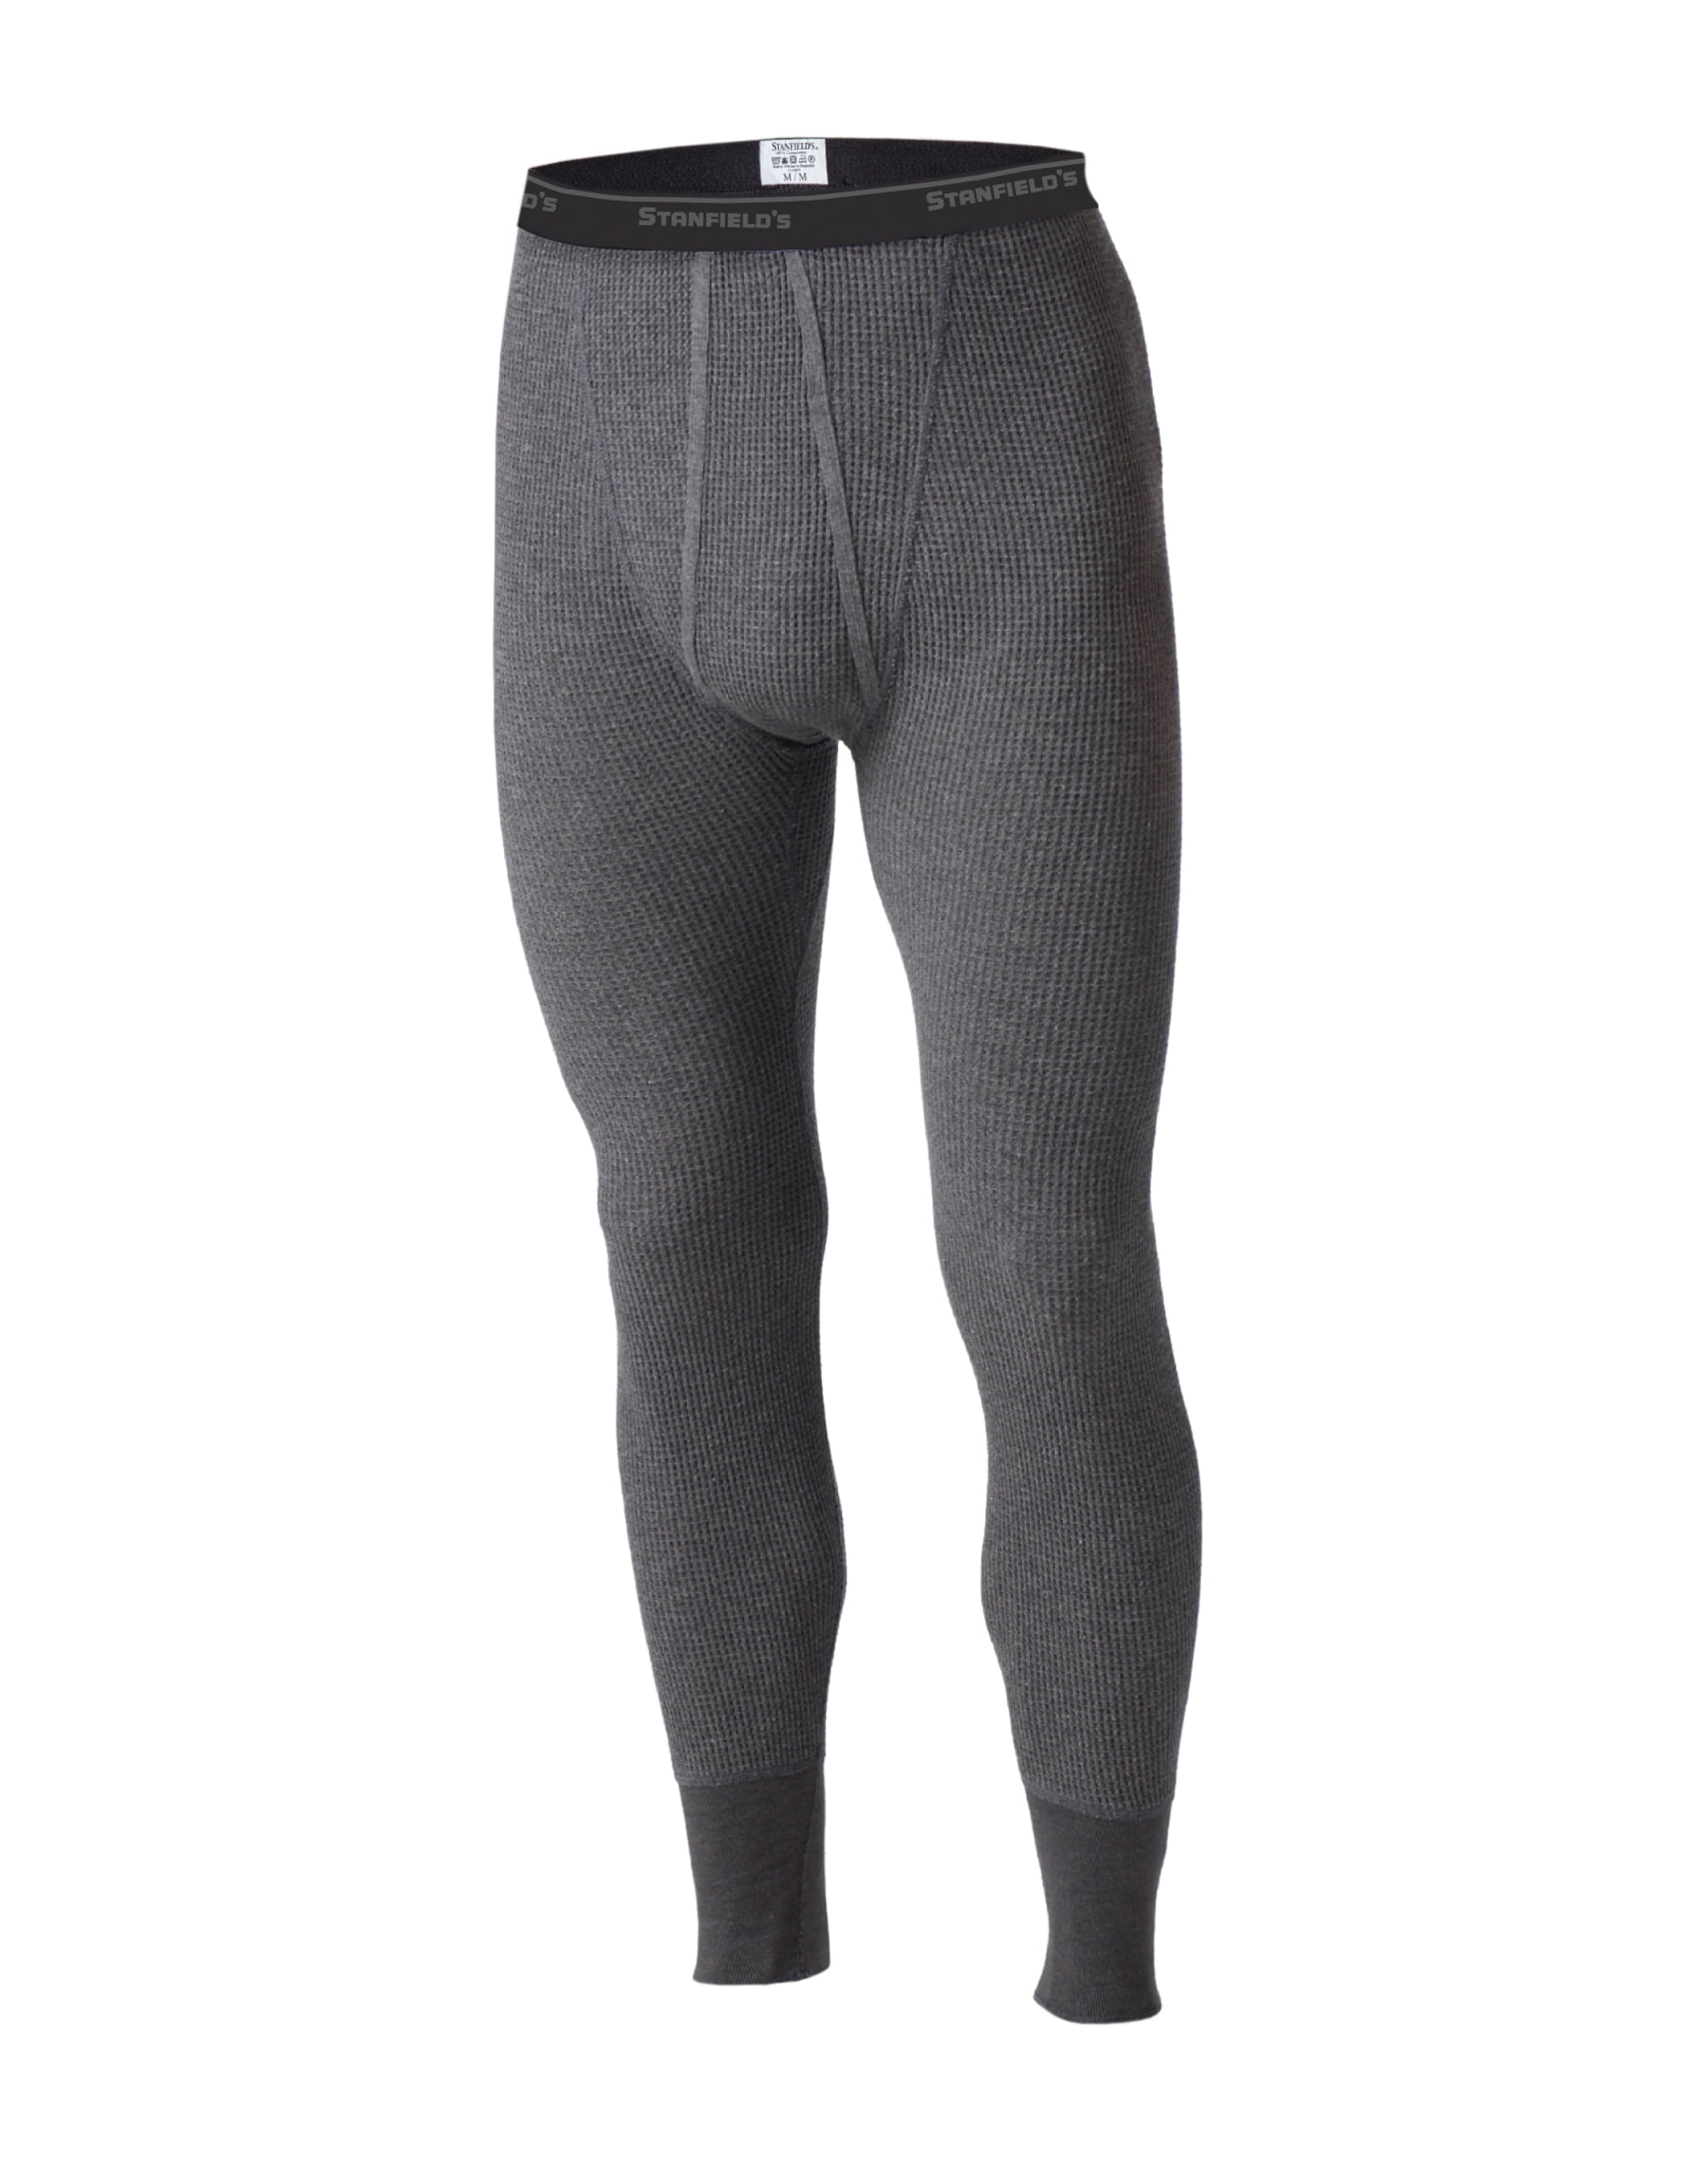 Essential's Men's Big and Tall Thermal Waffle Knit Long Johns 